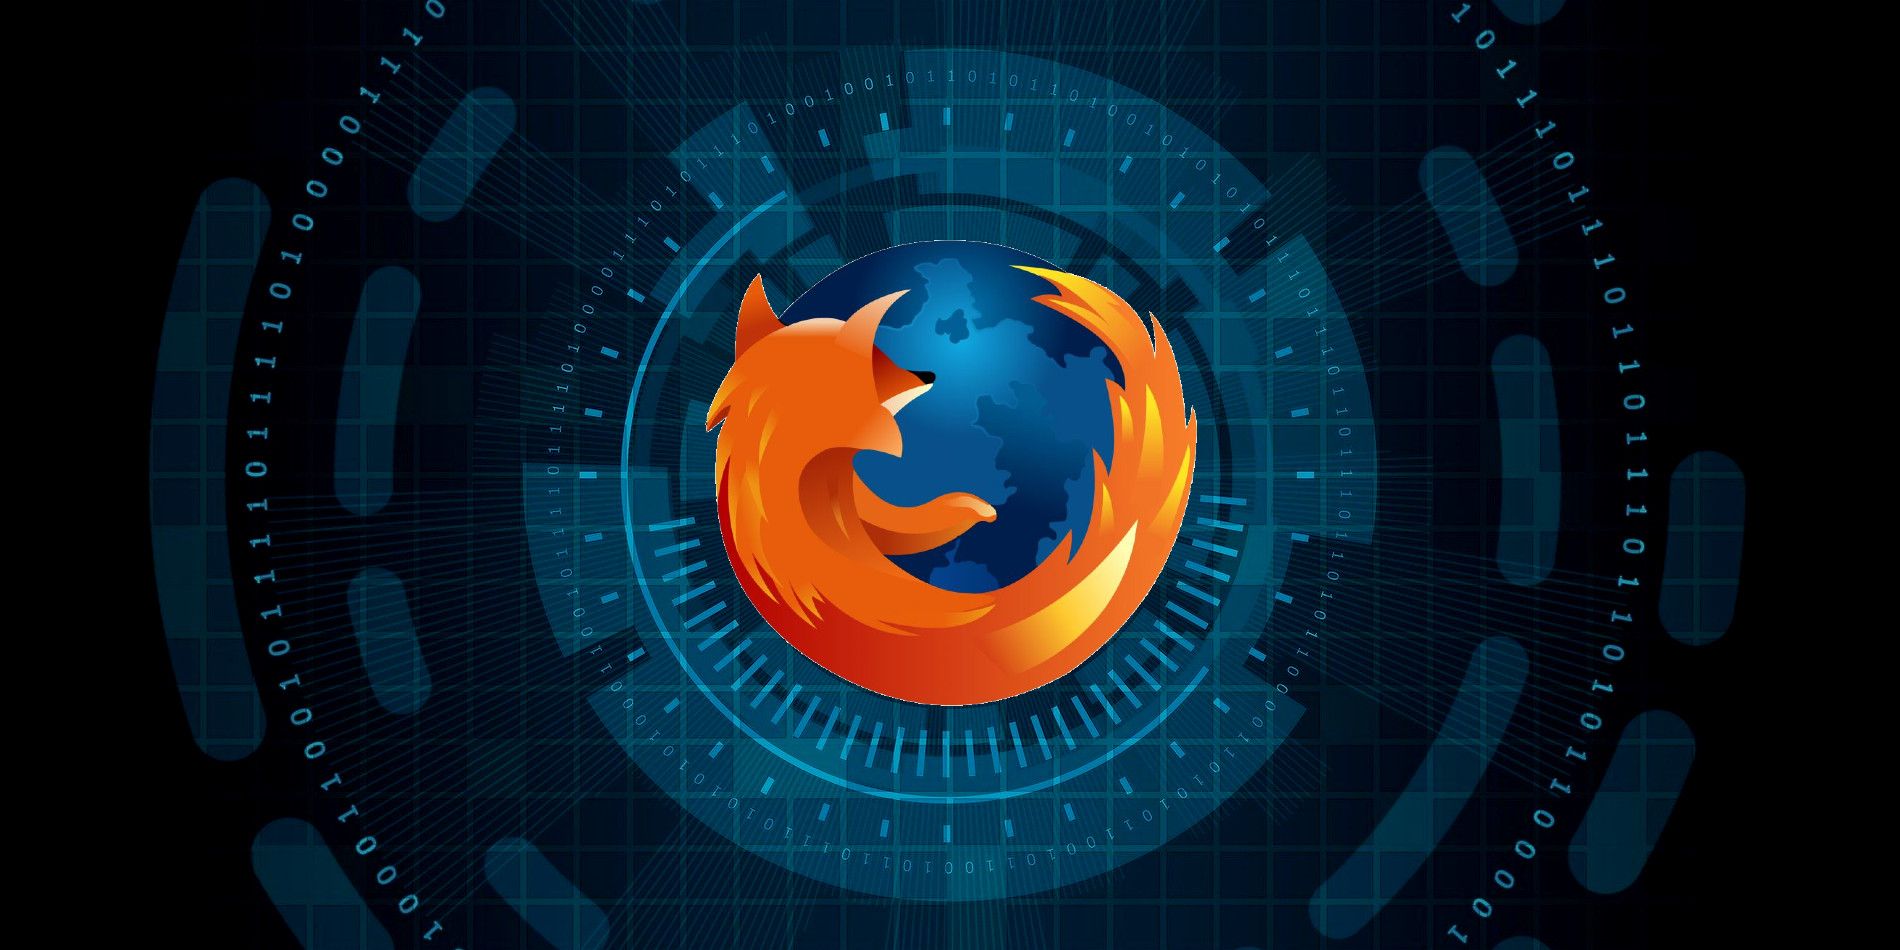 Firefox Notes